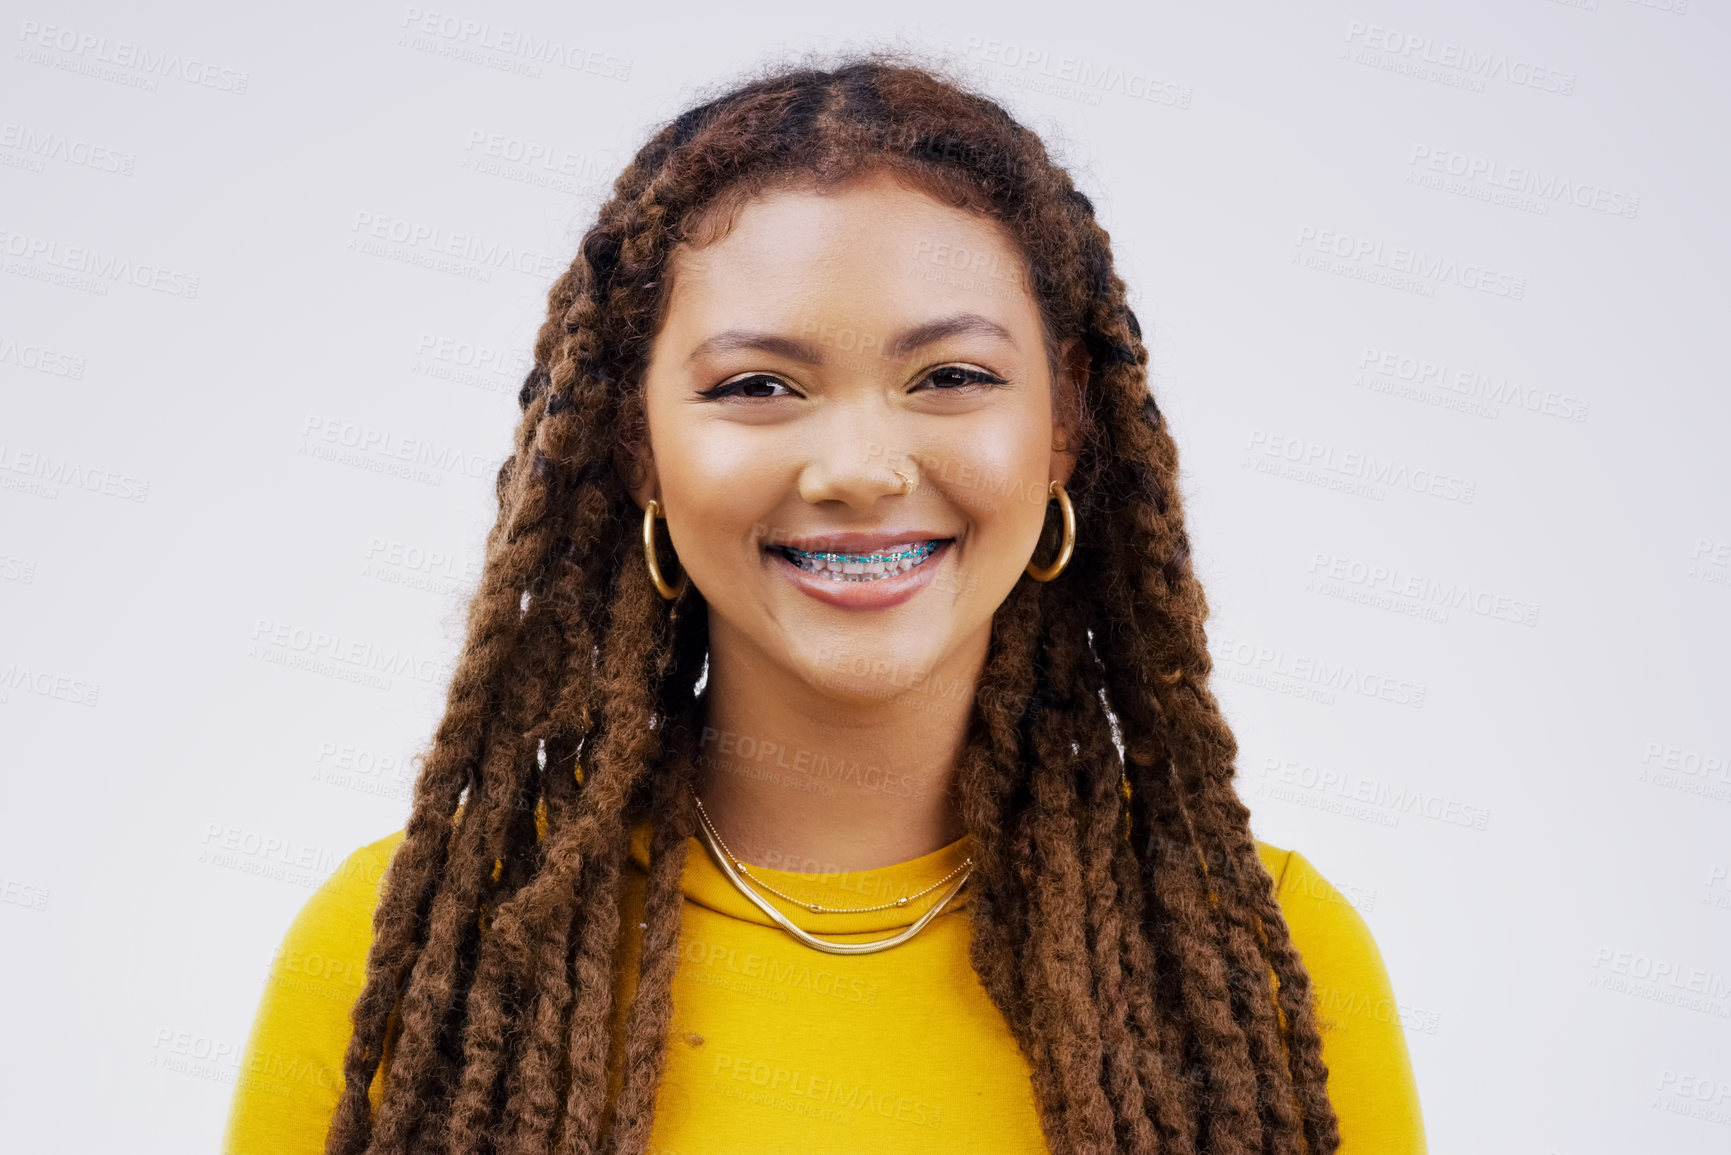 Buy stock photo Happy, smile and portrait of a woman with braces isolated on a white background in a studio. Happiness, confident and a face headshot of a young girl with dreadlocks, confidence and positivity